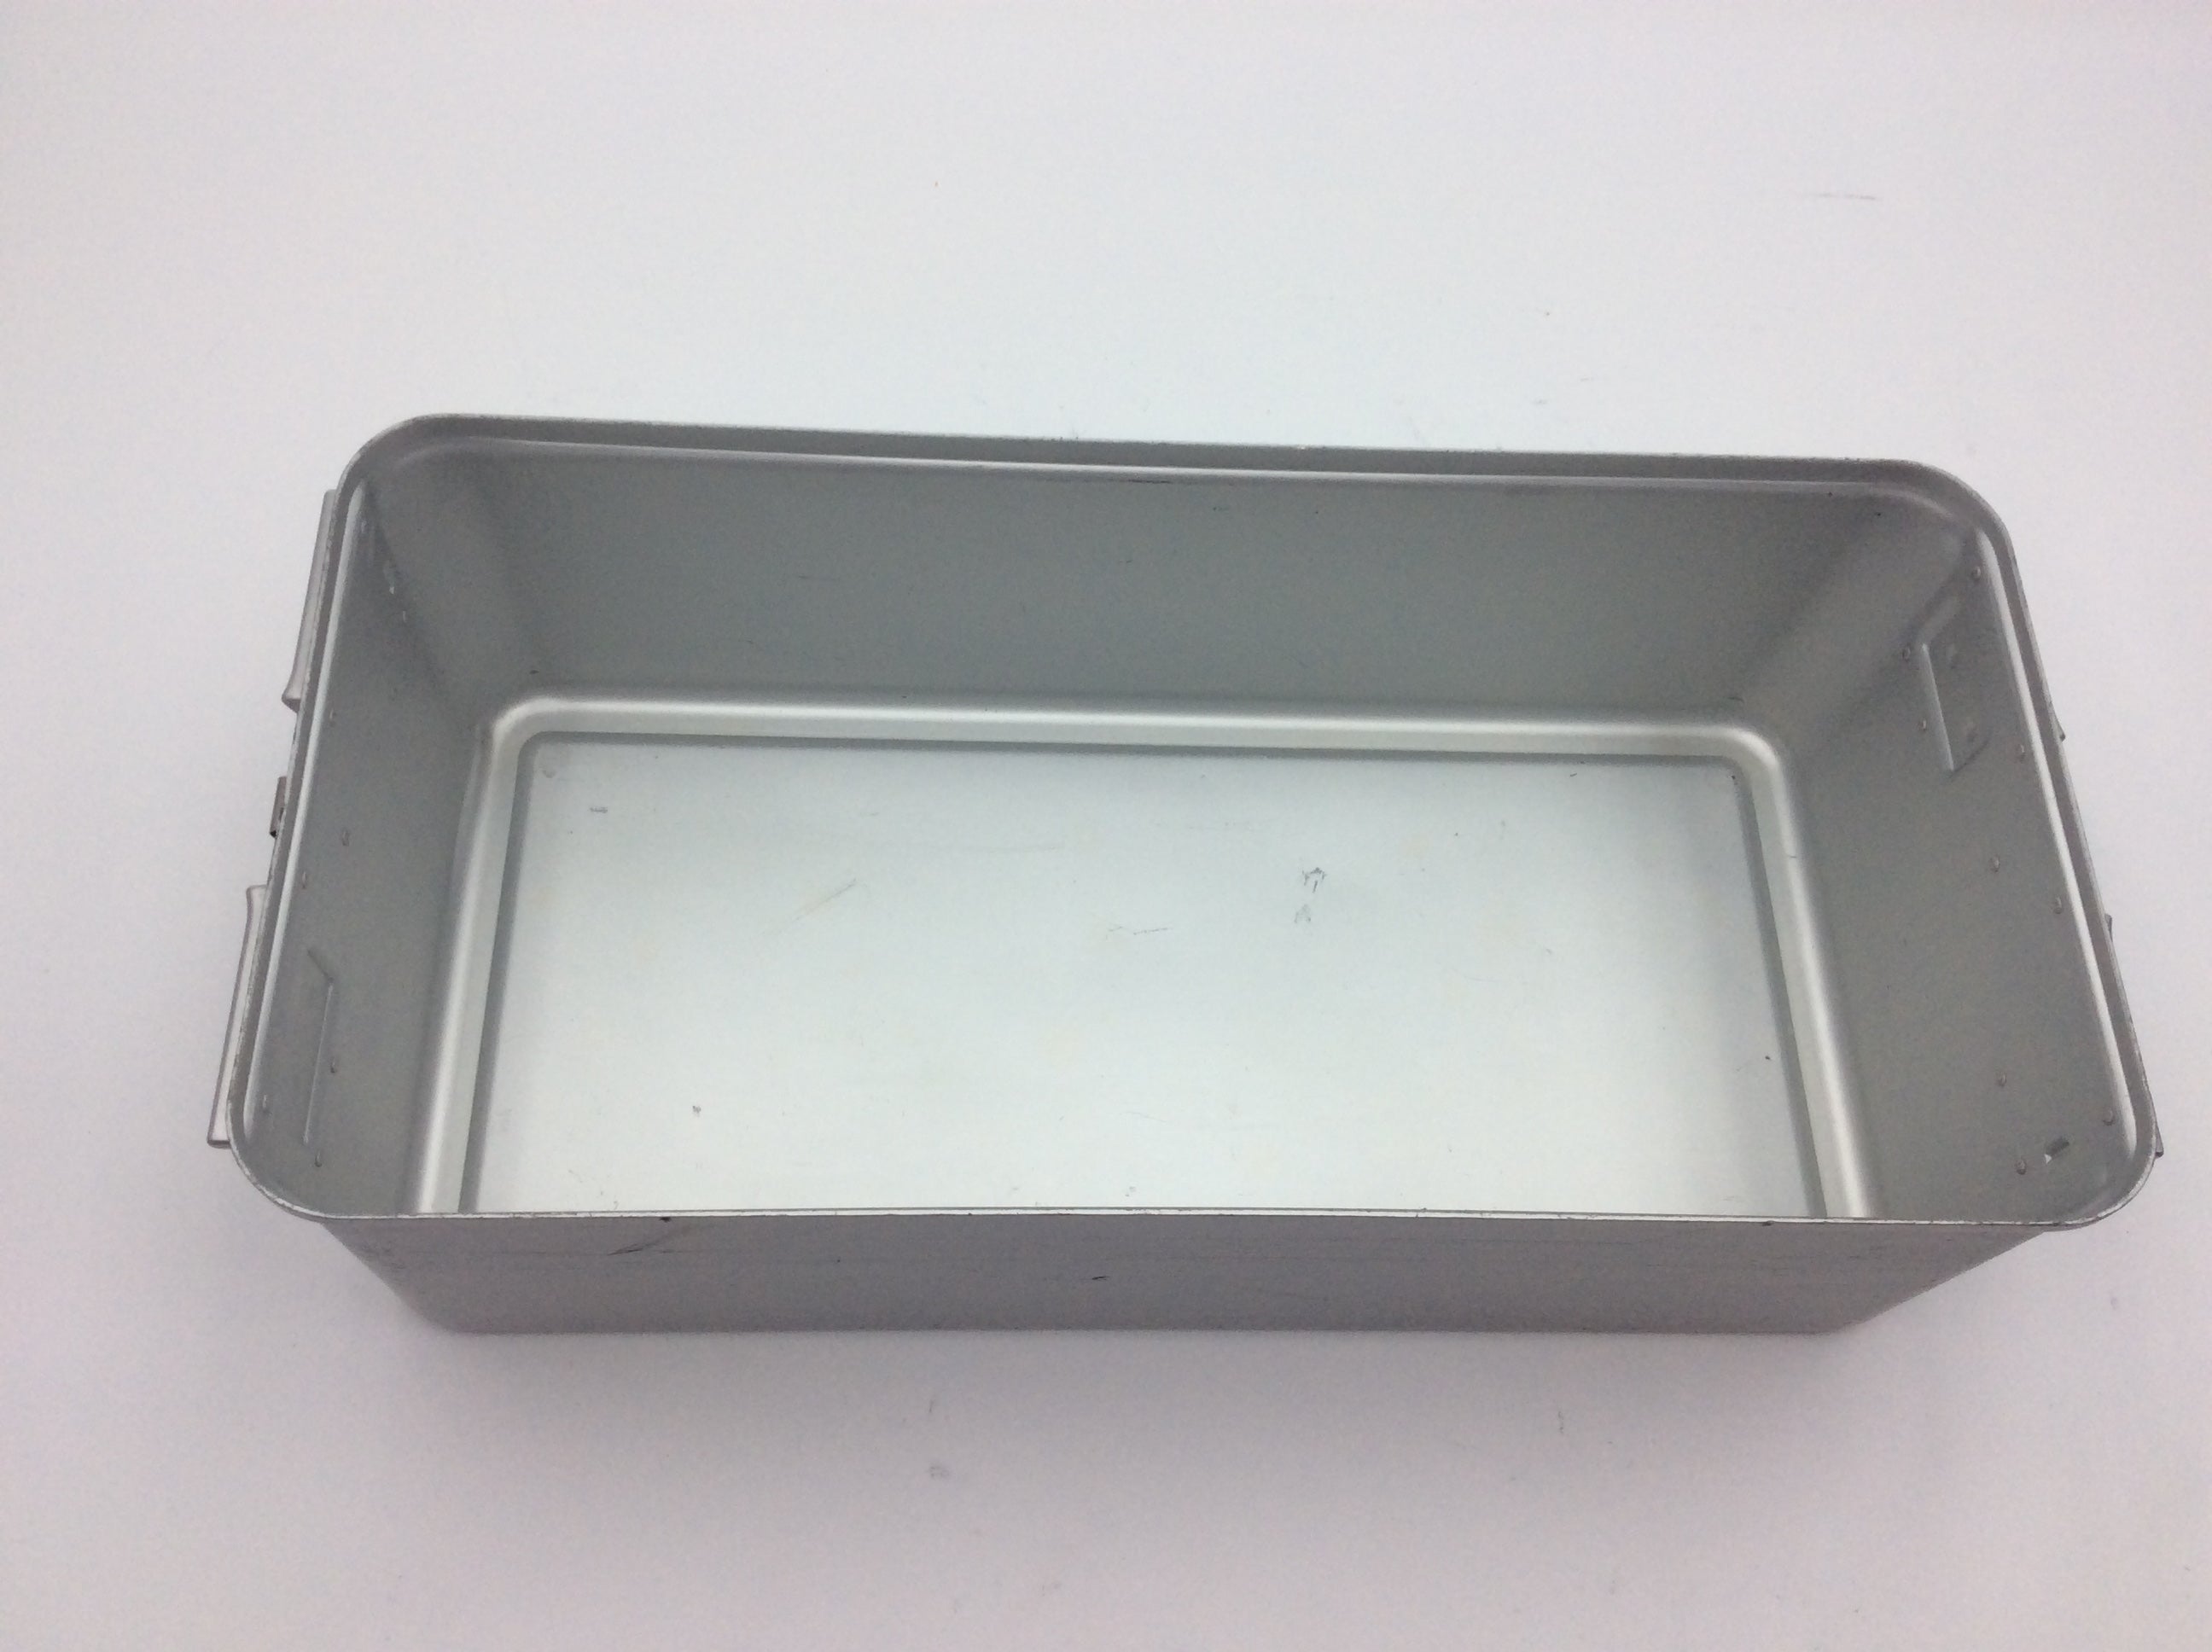 Load image into Gallery viewer, A Biomedical Service Aesculap 78532 Aluminum Sterilization Case Tray Container Jk44 150.00